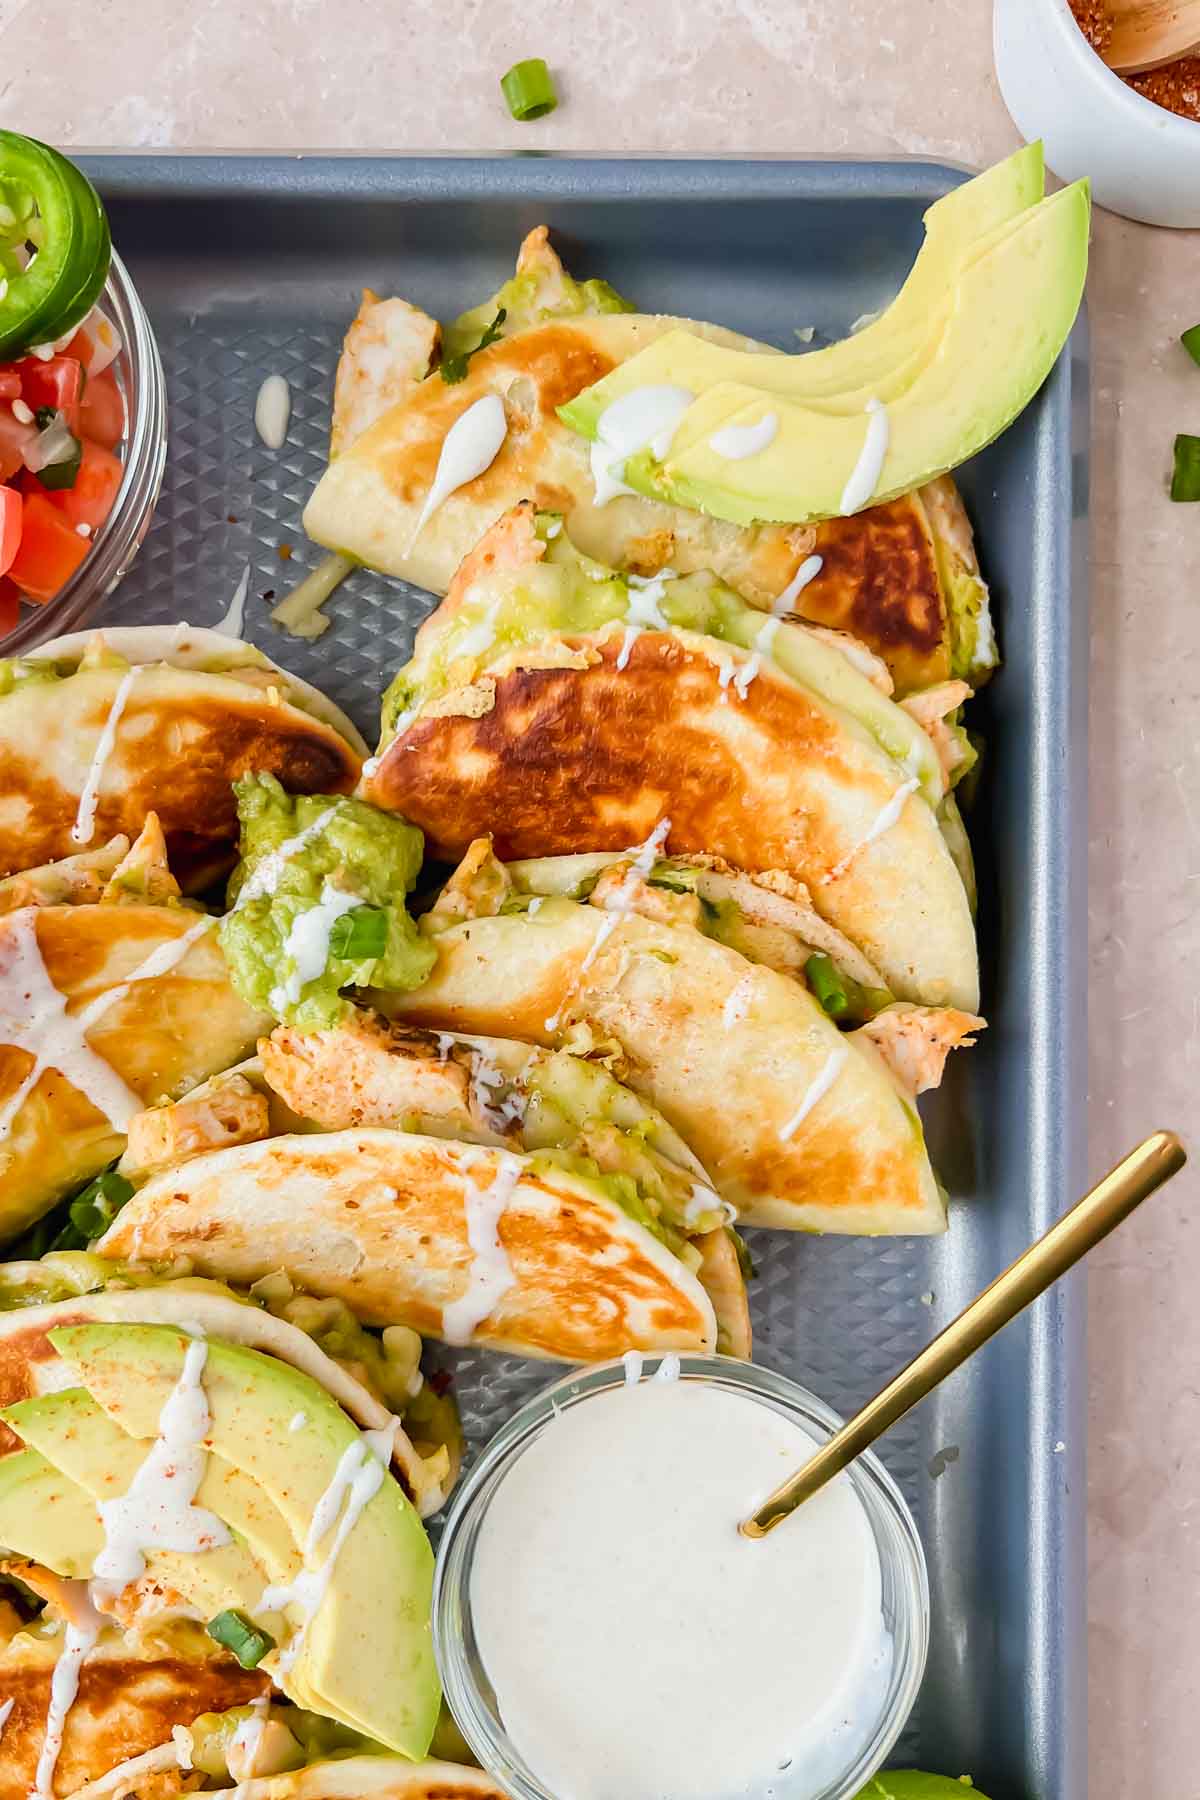 mini quesadillas lined up on gray sheet pan drizzled with guacamole, crema, and garnished with green onions.